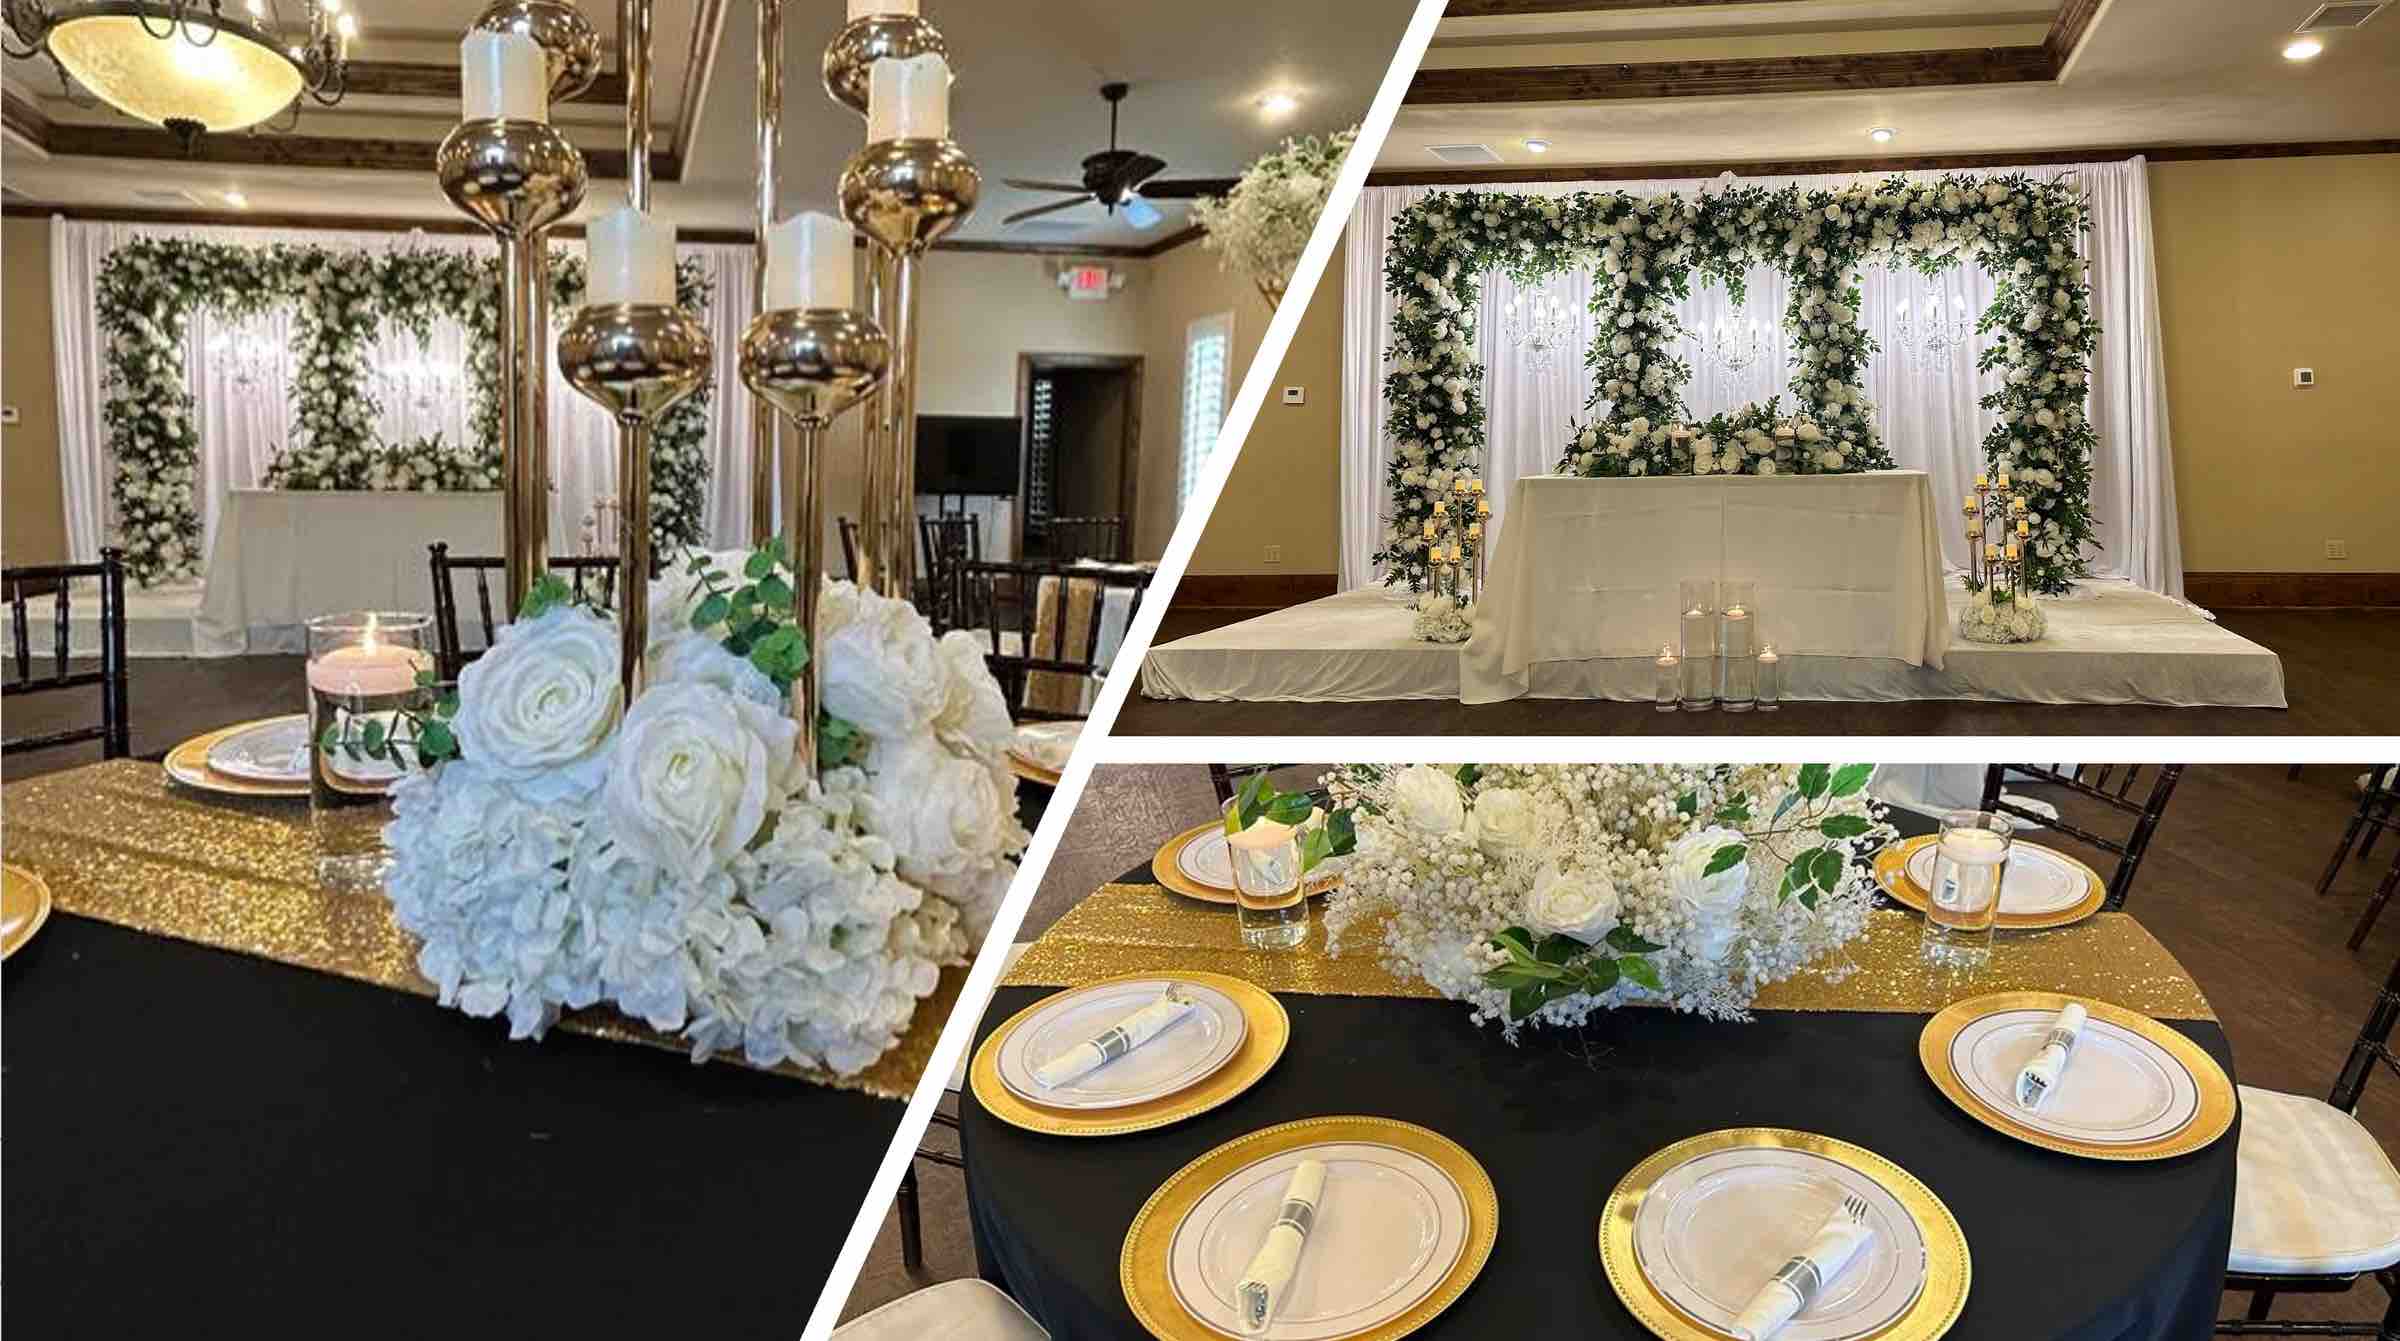 A snapshot of a classic all-white wedding dinner table and stage decor, beautifully adorned with white florals and a touch of lush greenery, creating an atmosphere of timeless sophistication and romance.